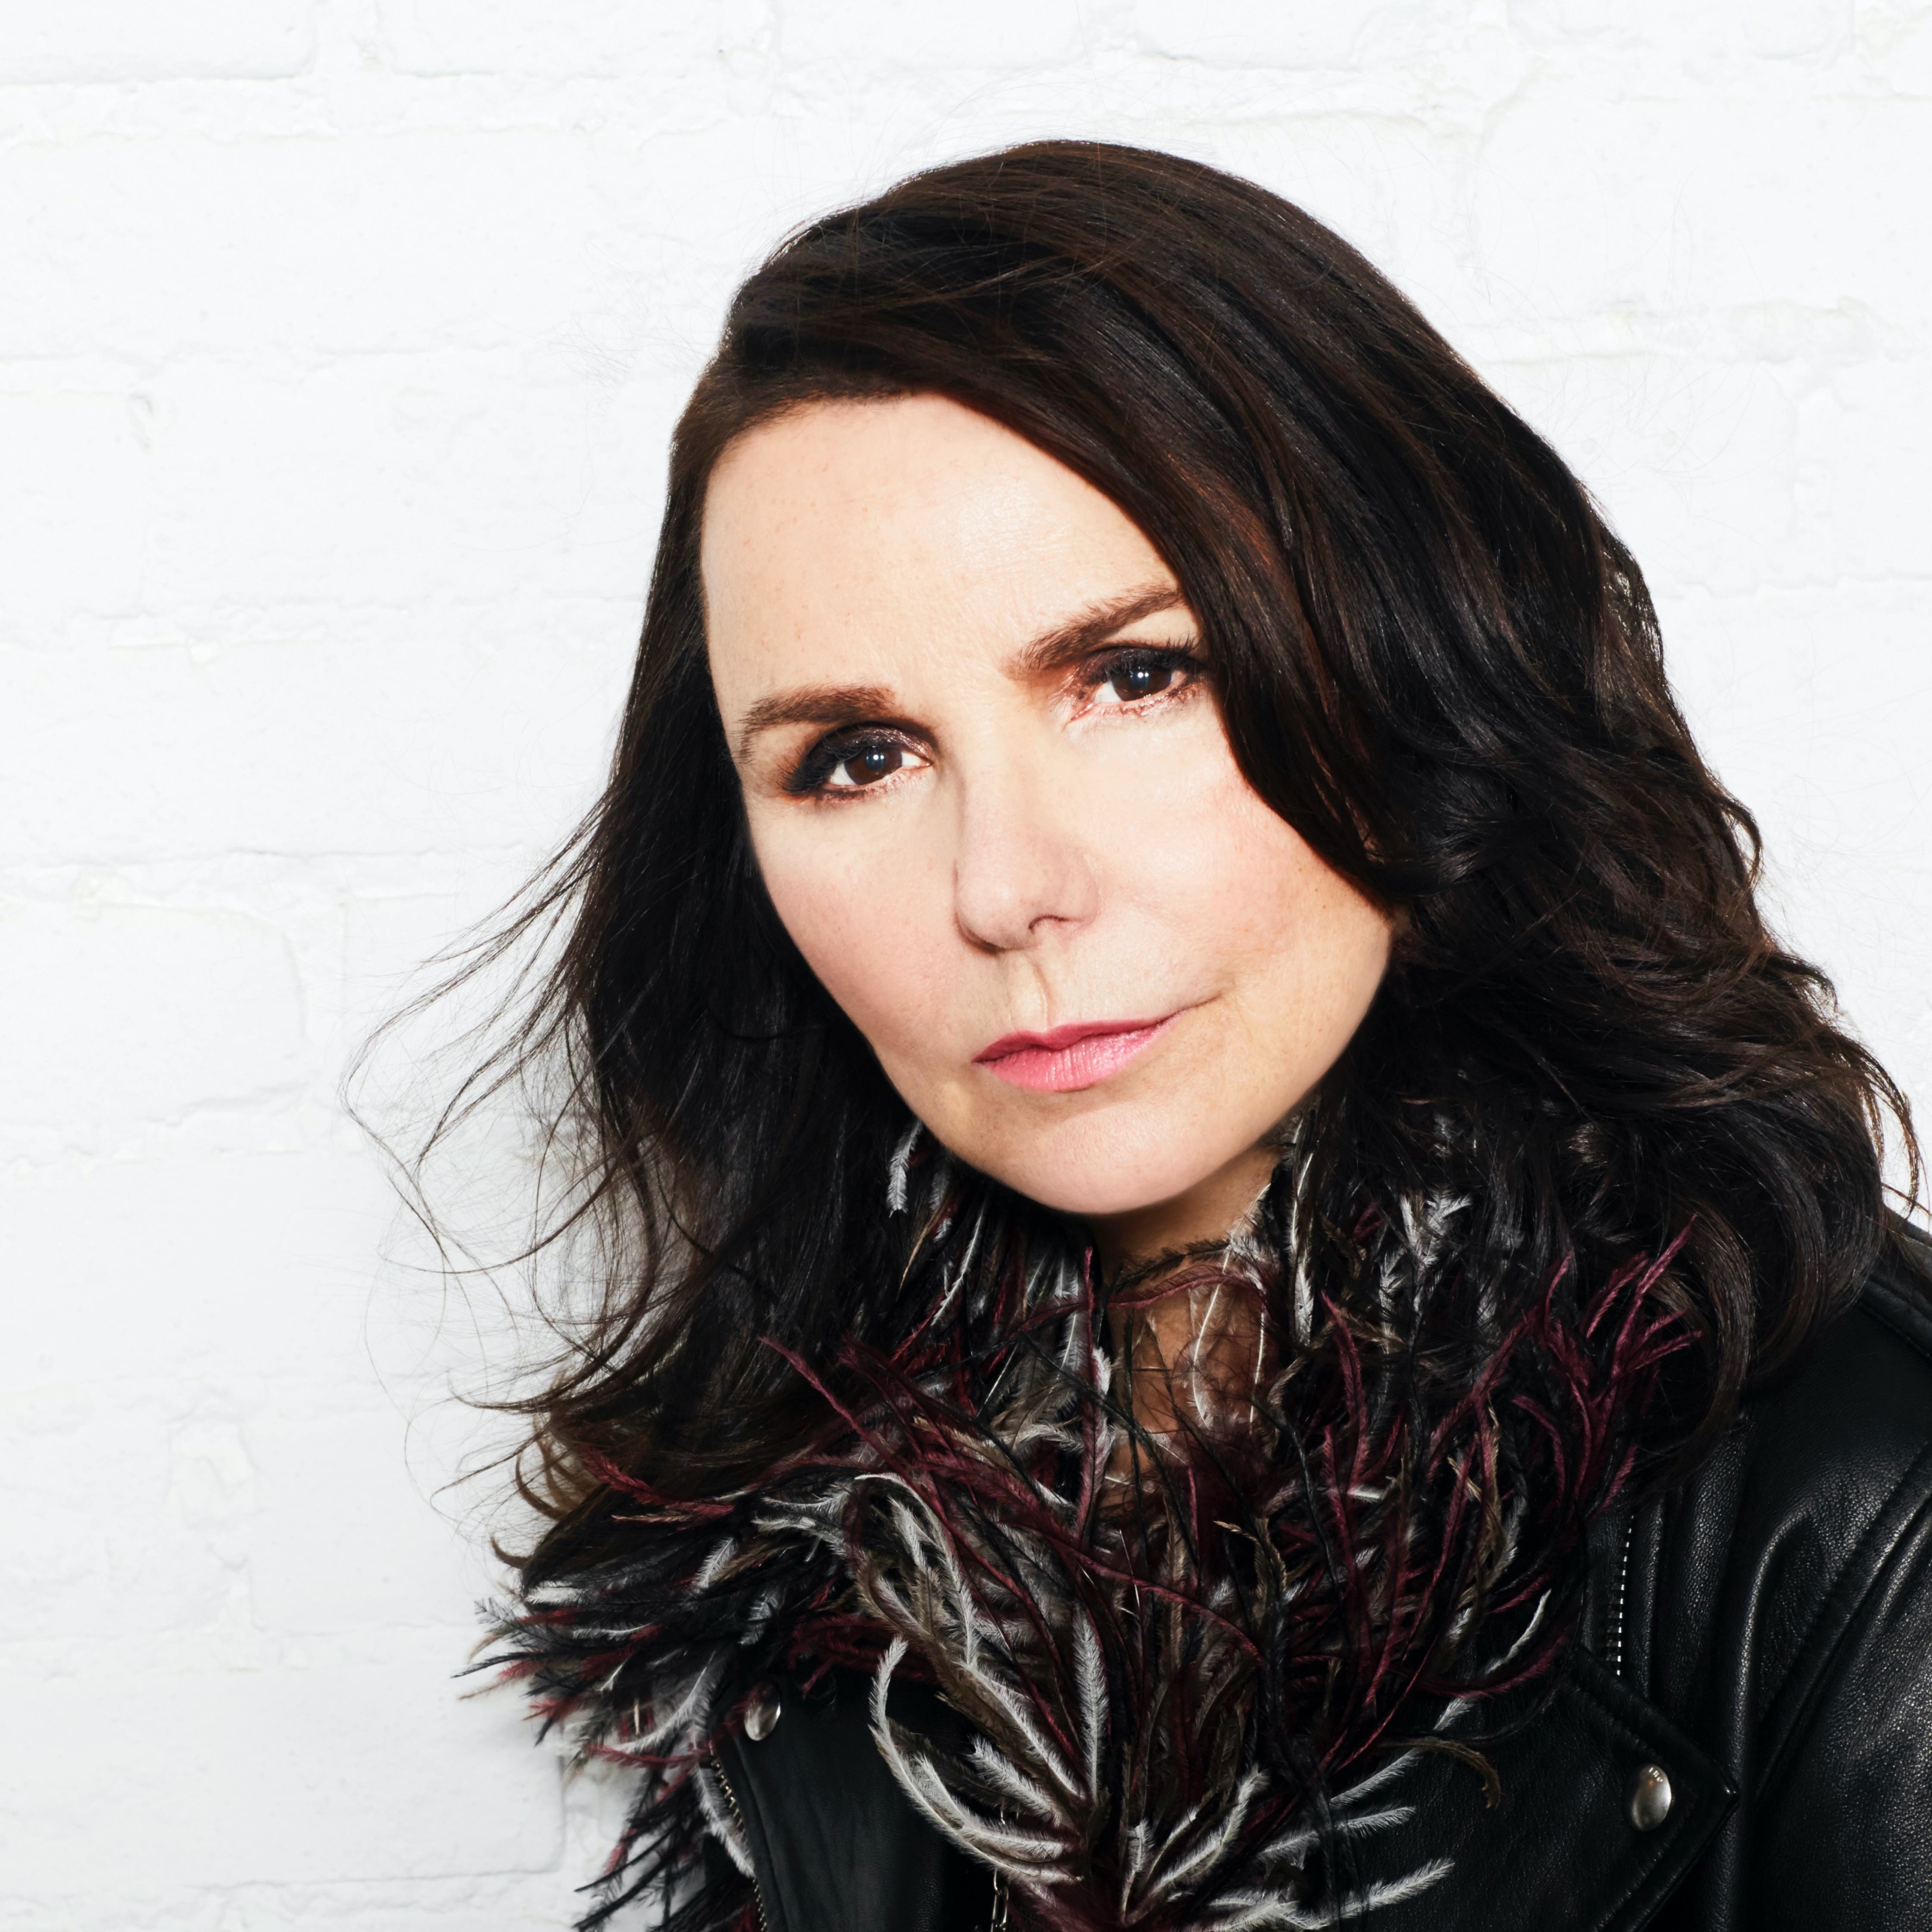 Behind The Song: “Sometimes Love Just Ain’t Enough” by Patty Smyth with Don Henley